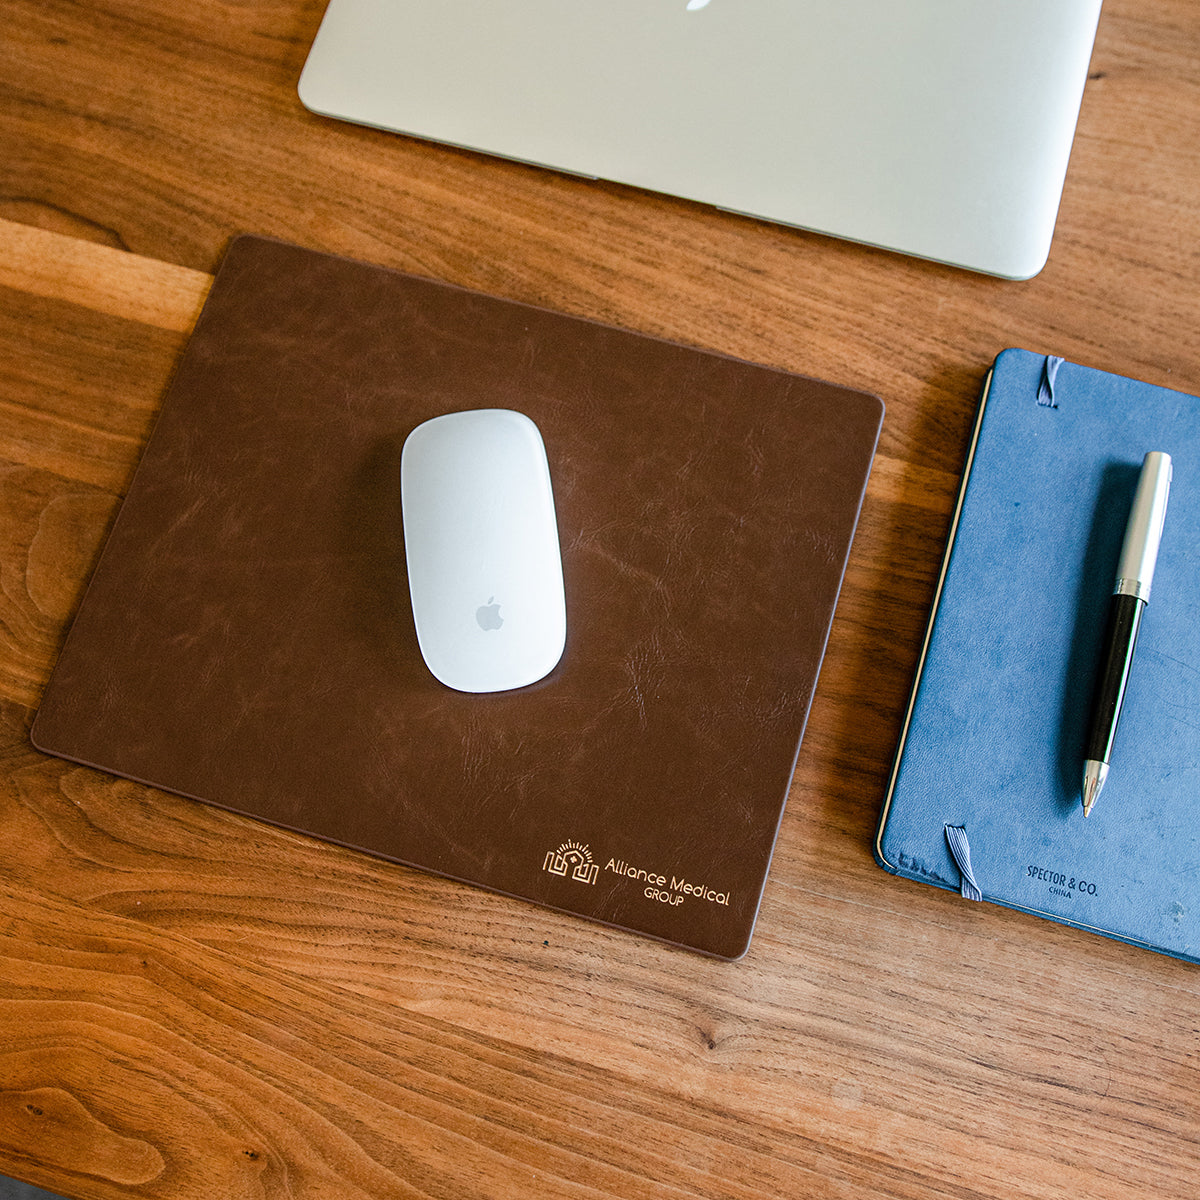 Branded Mouse Pad